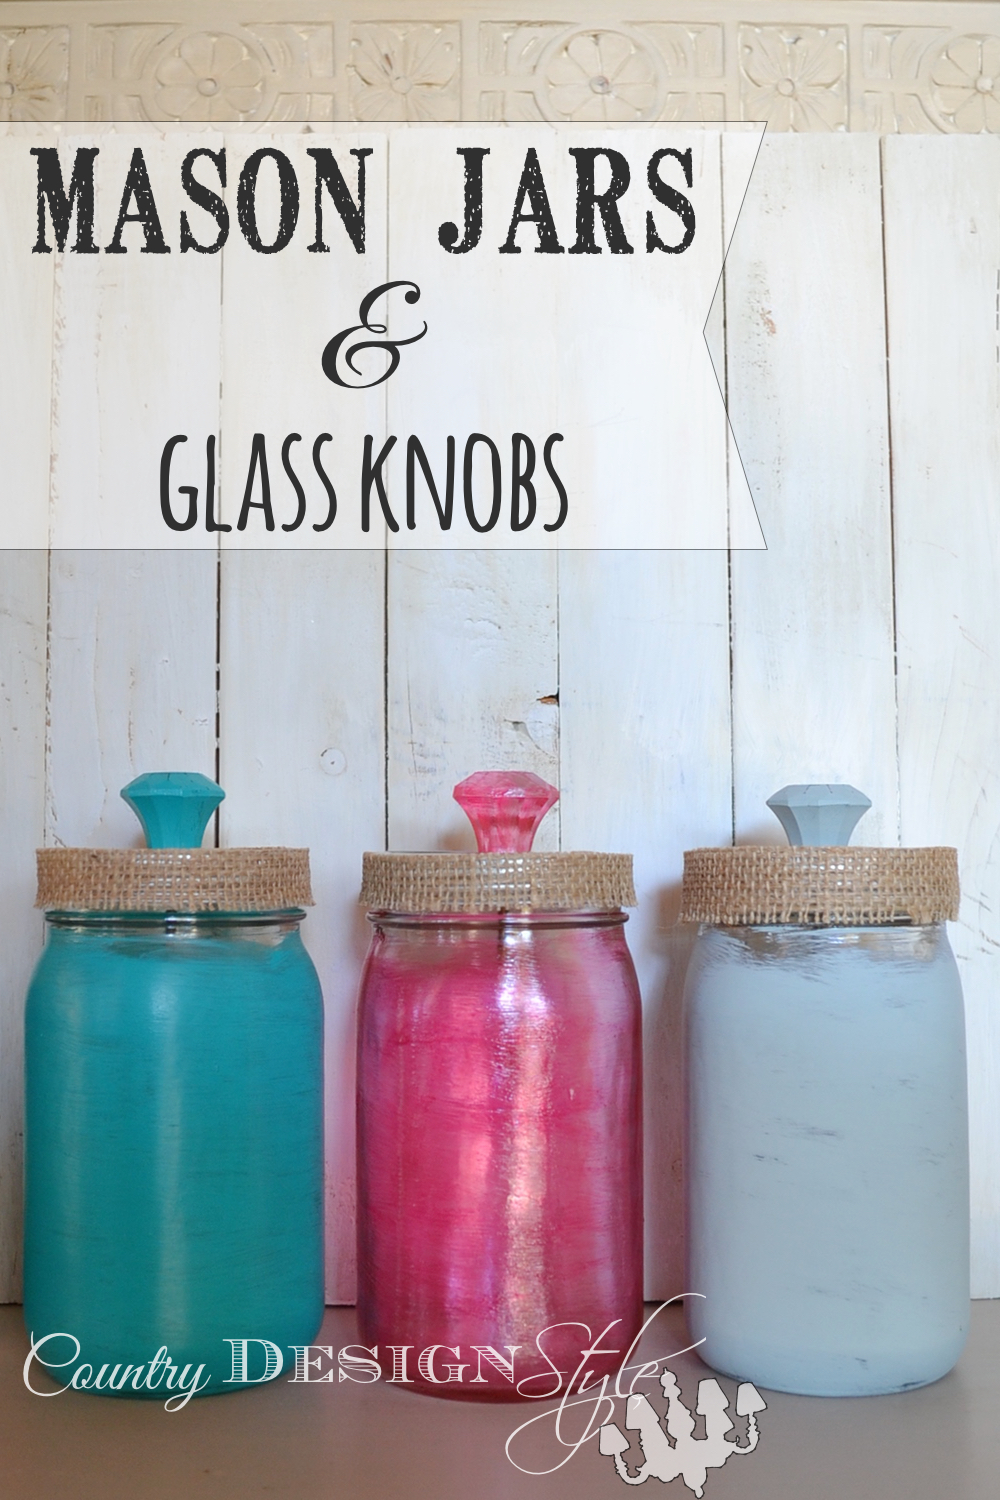 mason-jars-and-glass-knobs-country-design-style-pn